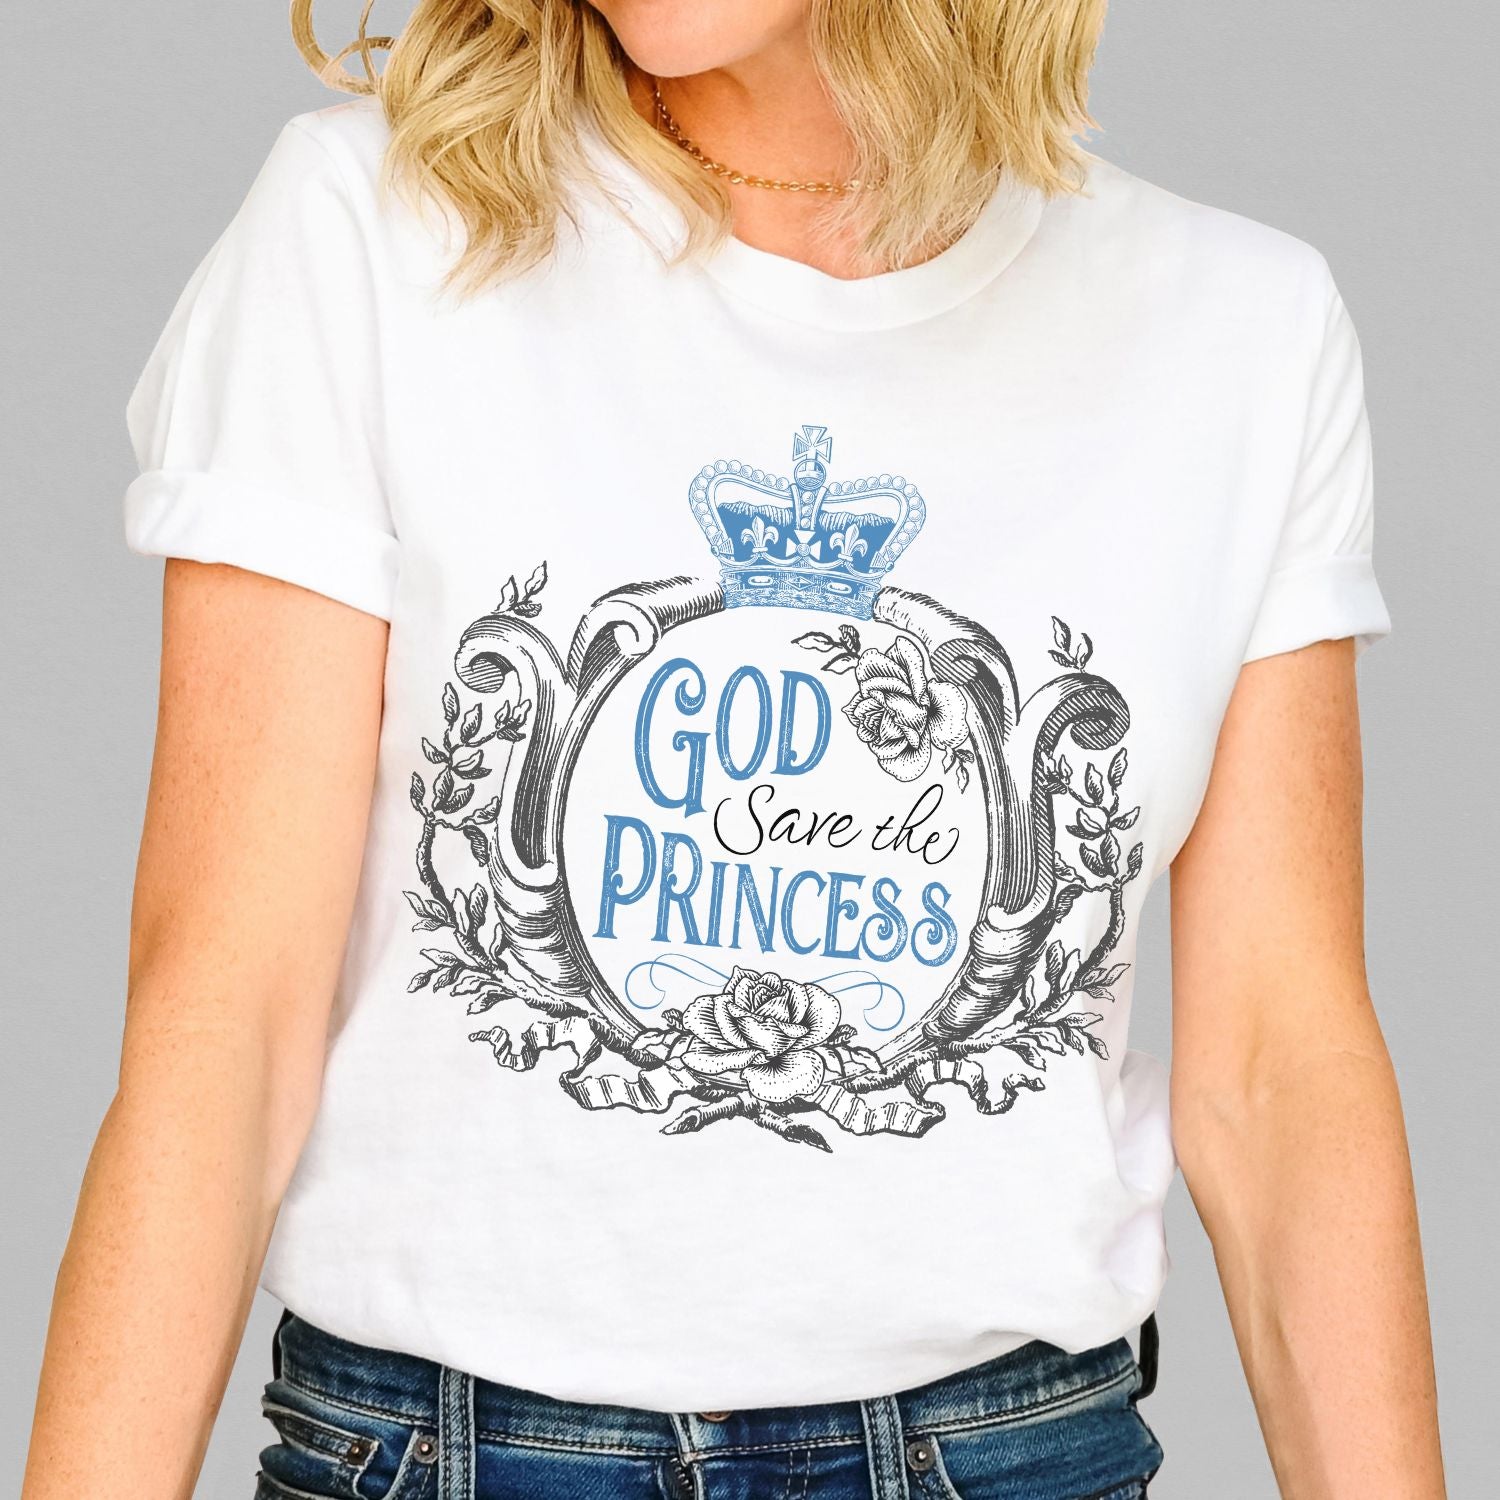 Woman wearing a soft white vintage British Royal Family women's unisex t-shirt that says "God Save the Princess"  with Blue crown, roses, and baroque filigree frame design, created as a reminder to pray for the United Kingdom Princess of Wales, Kate Middleton in her battle with cancer